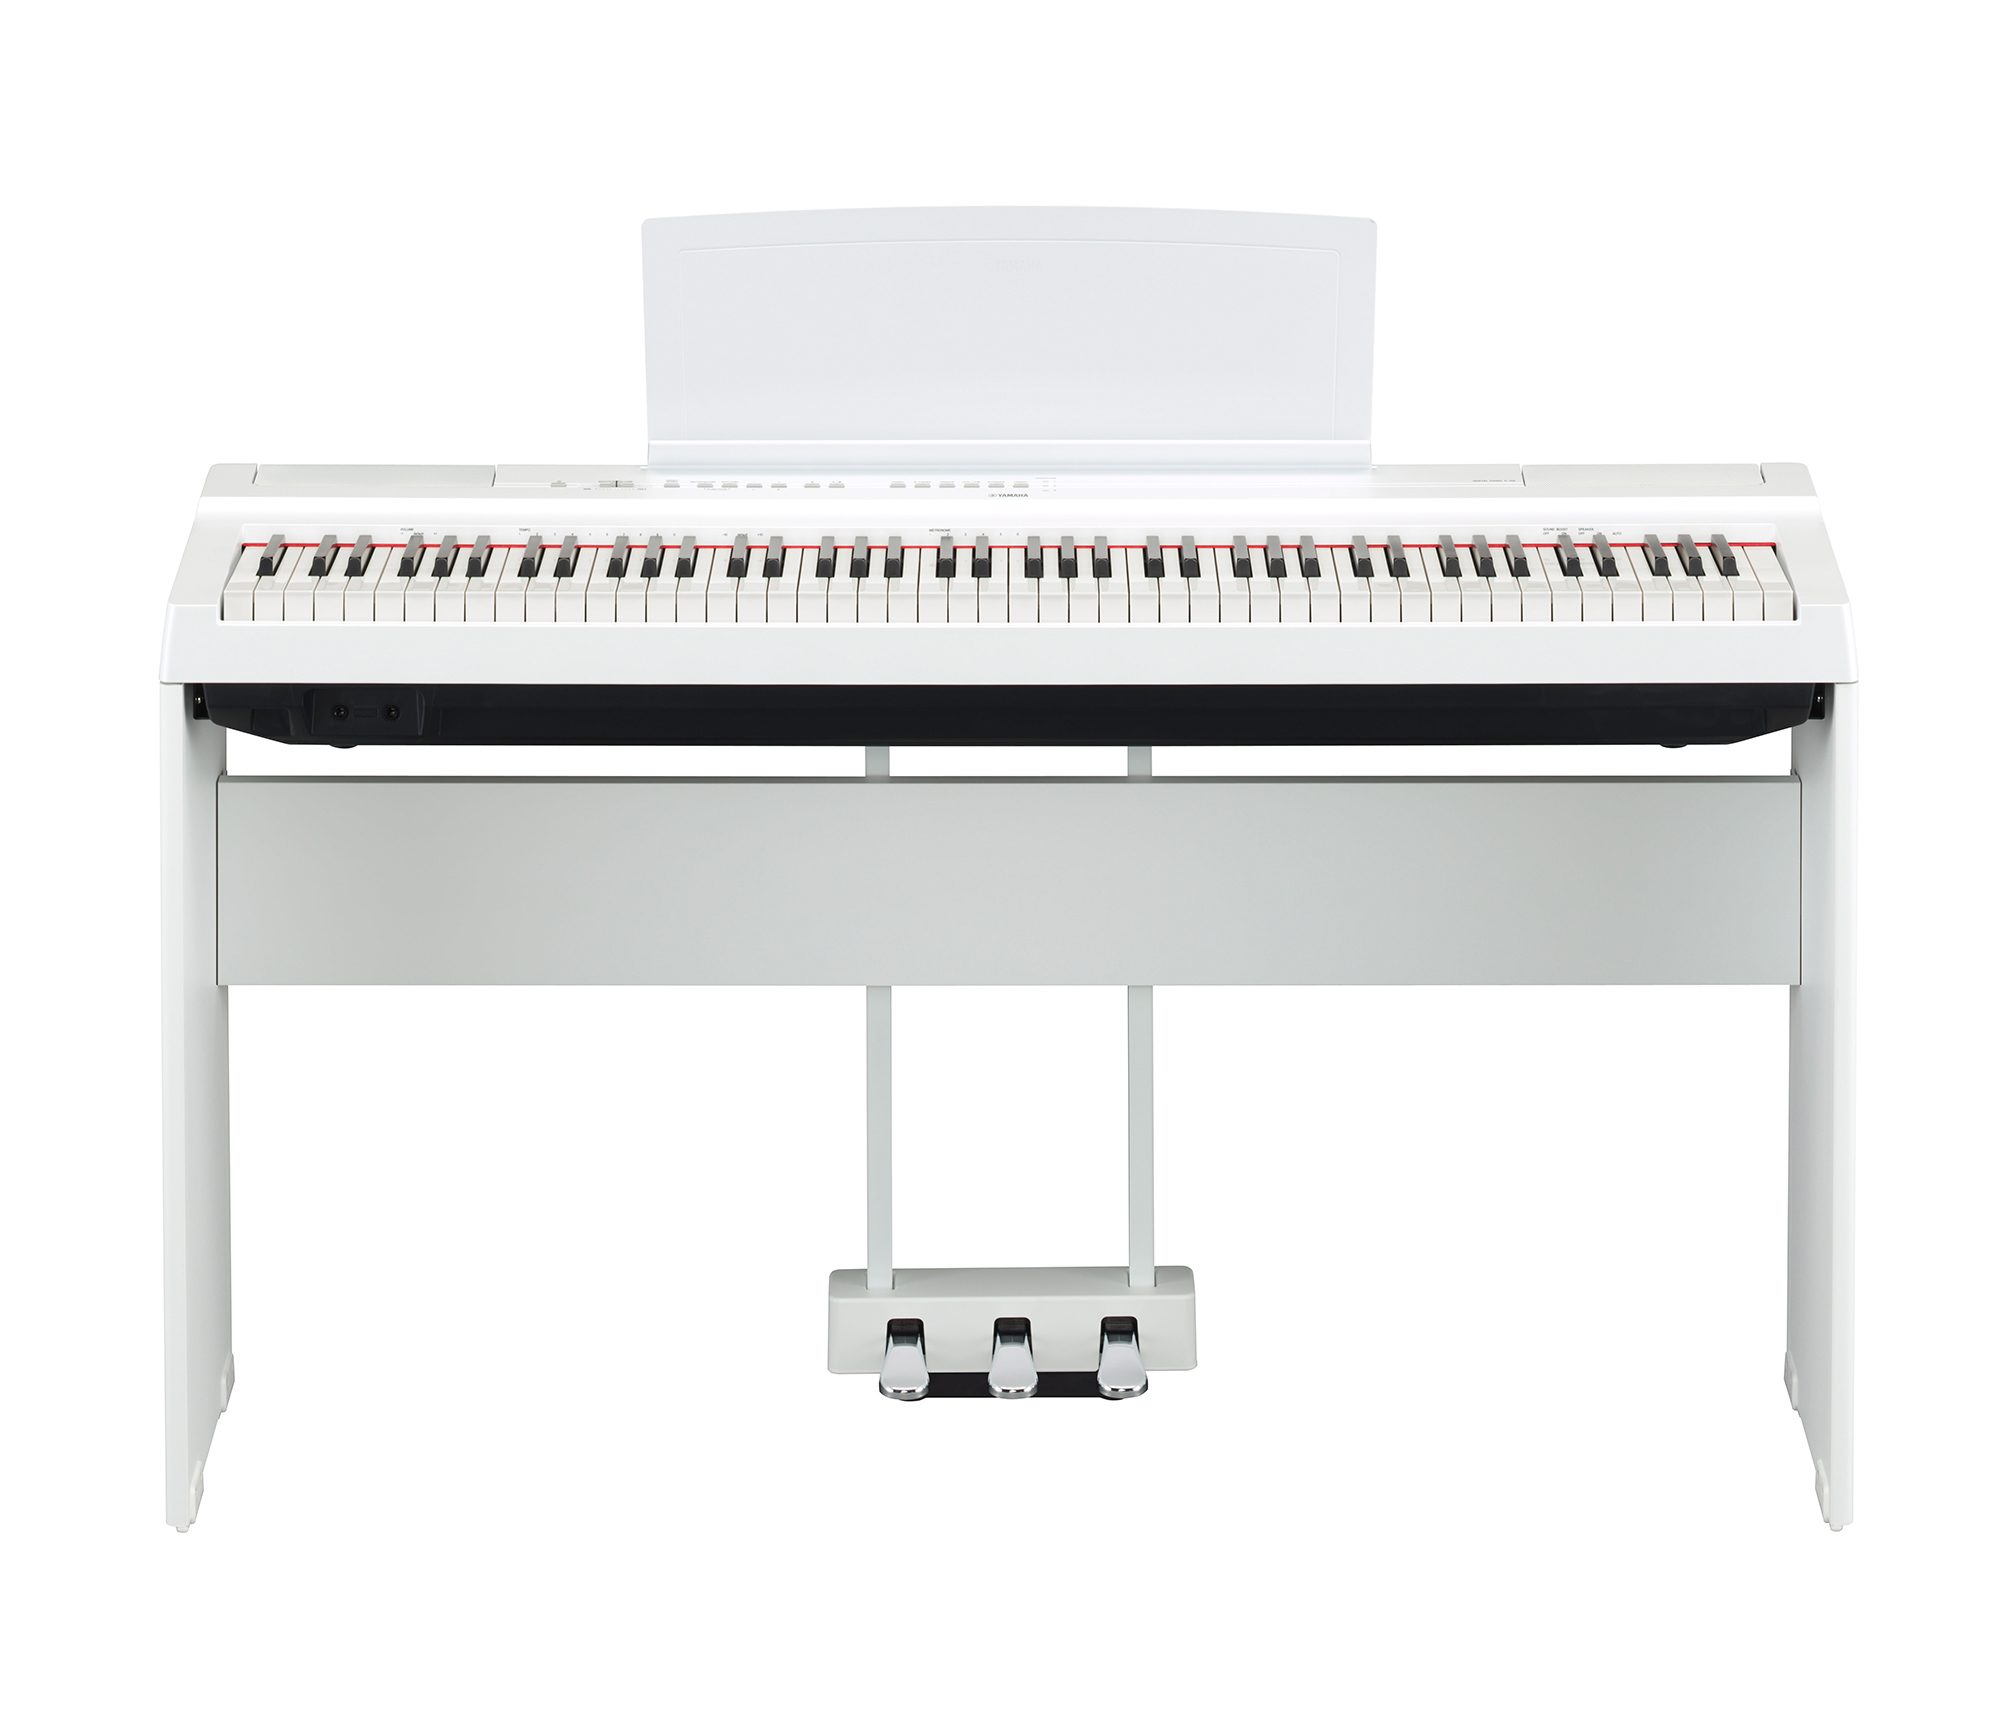 P-125 - Overview - P Series - Pianos - Musical Instruments